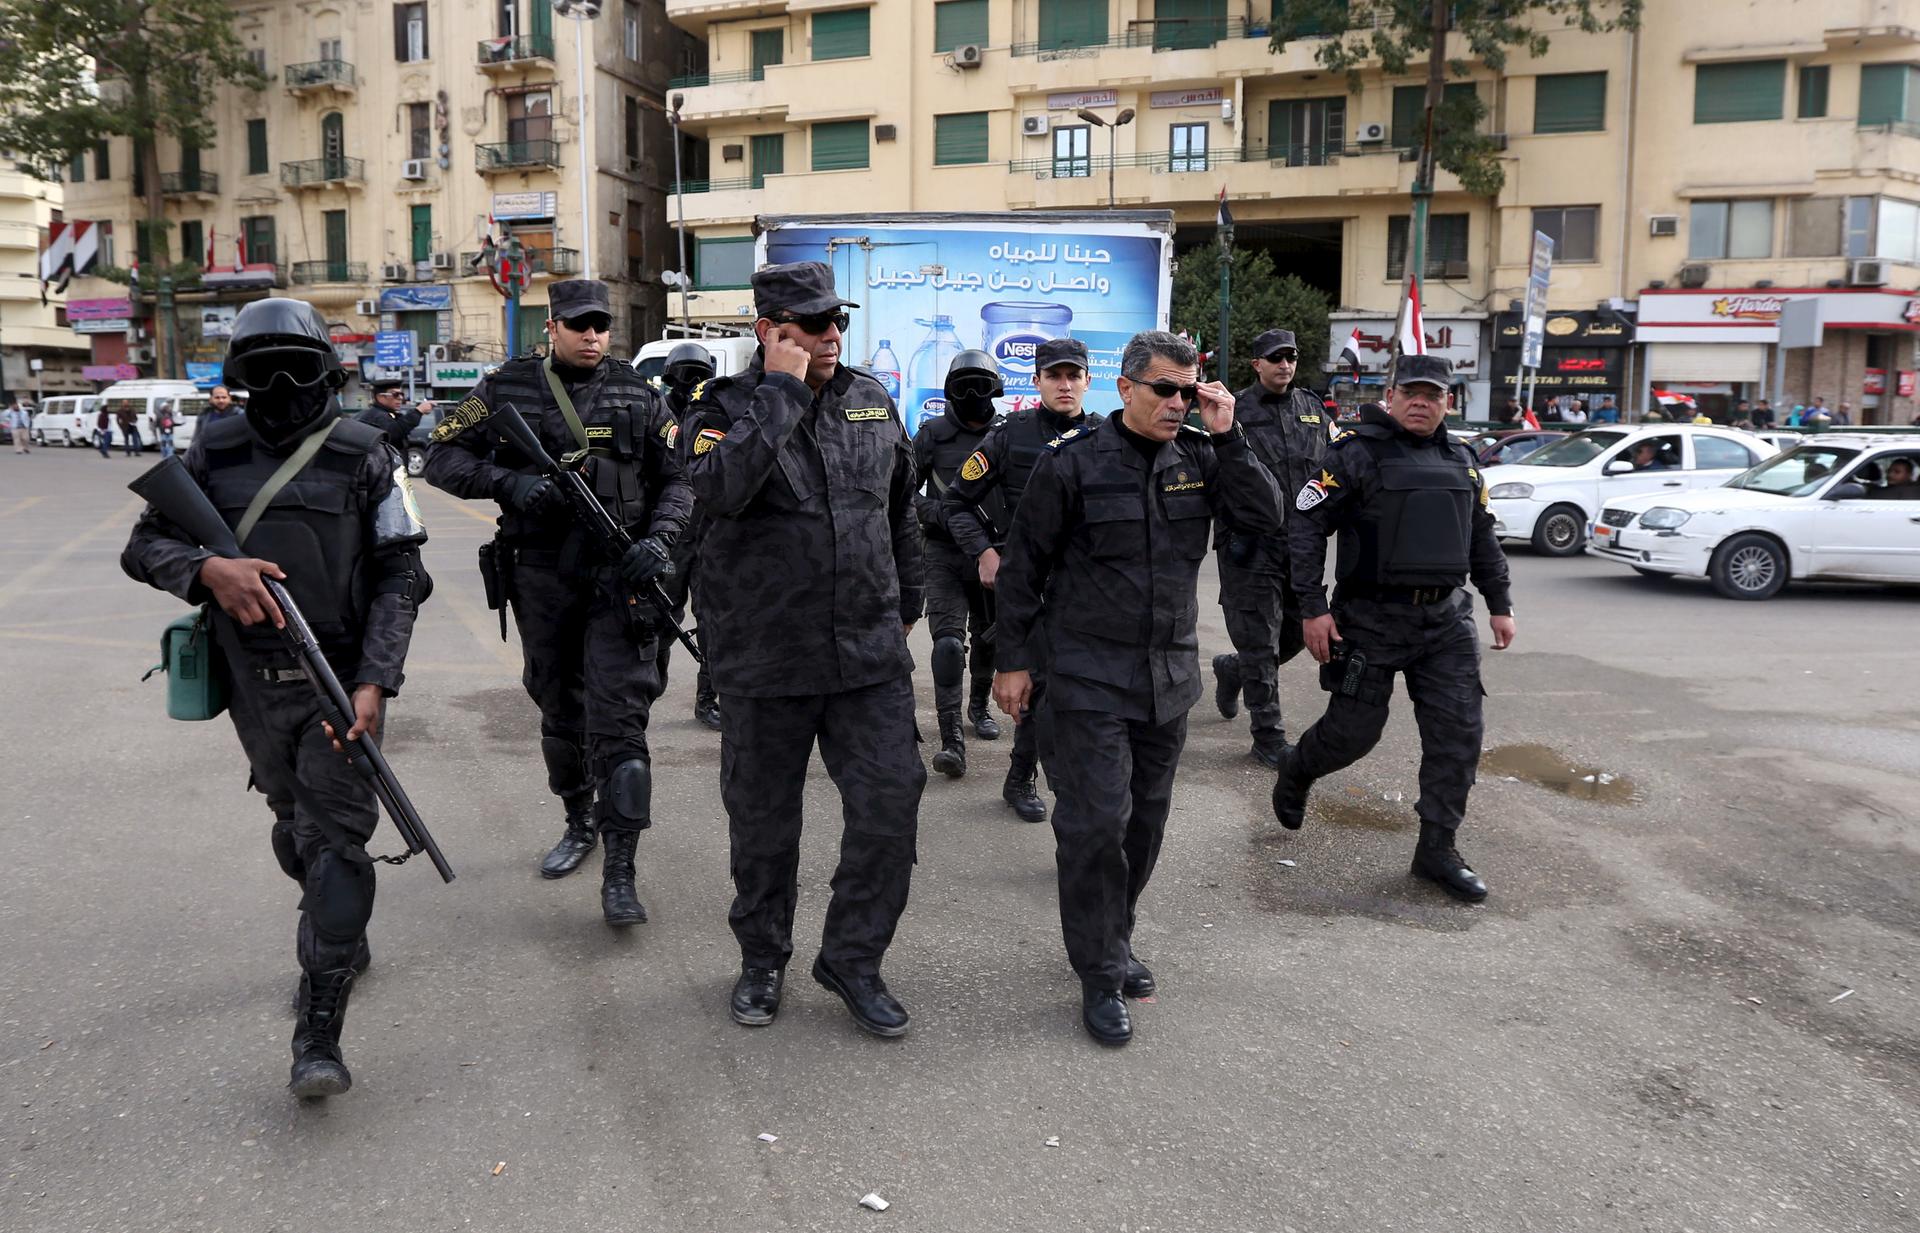 Egyptian police made a show of force in Cairo’s iconic Tahrir Square on January 25, 2016, as small pro-government demonstrations took place on the fifth anniversary of the uprising that toppled former dictator, Hosni Mubarak.